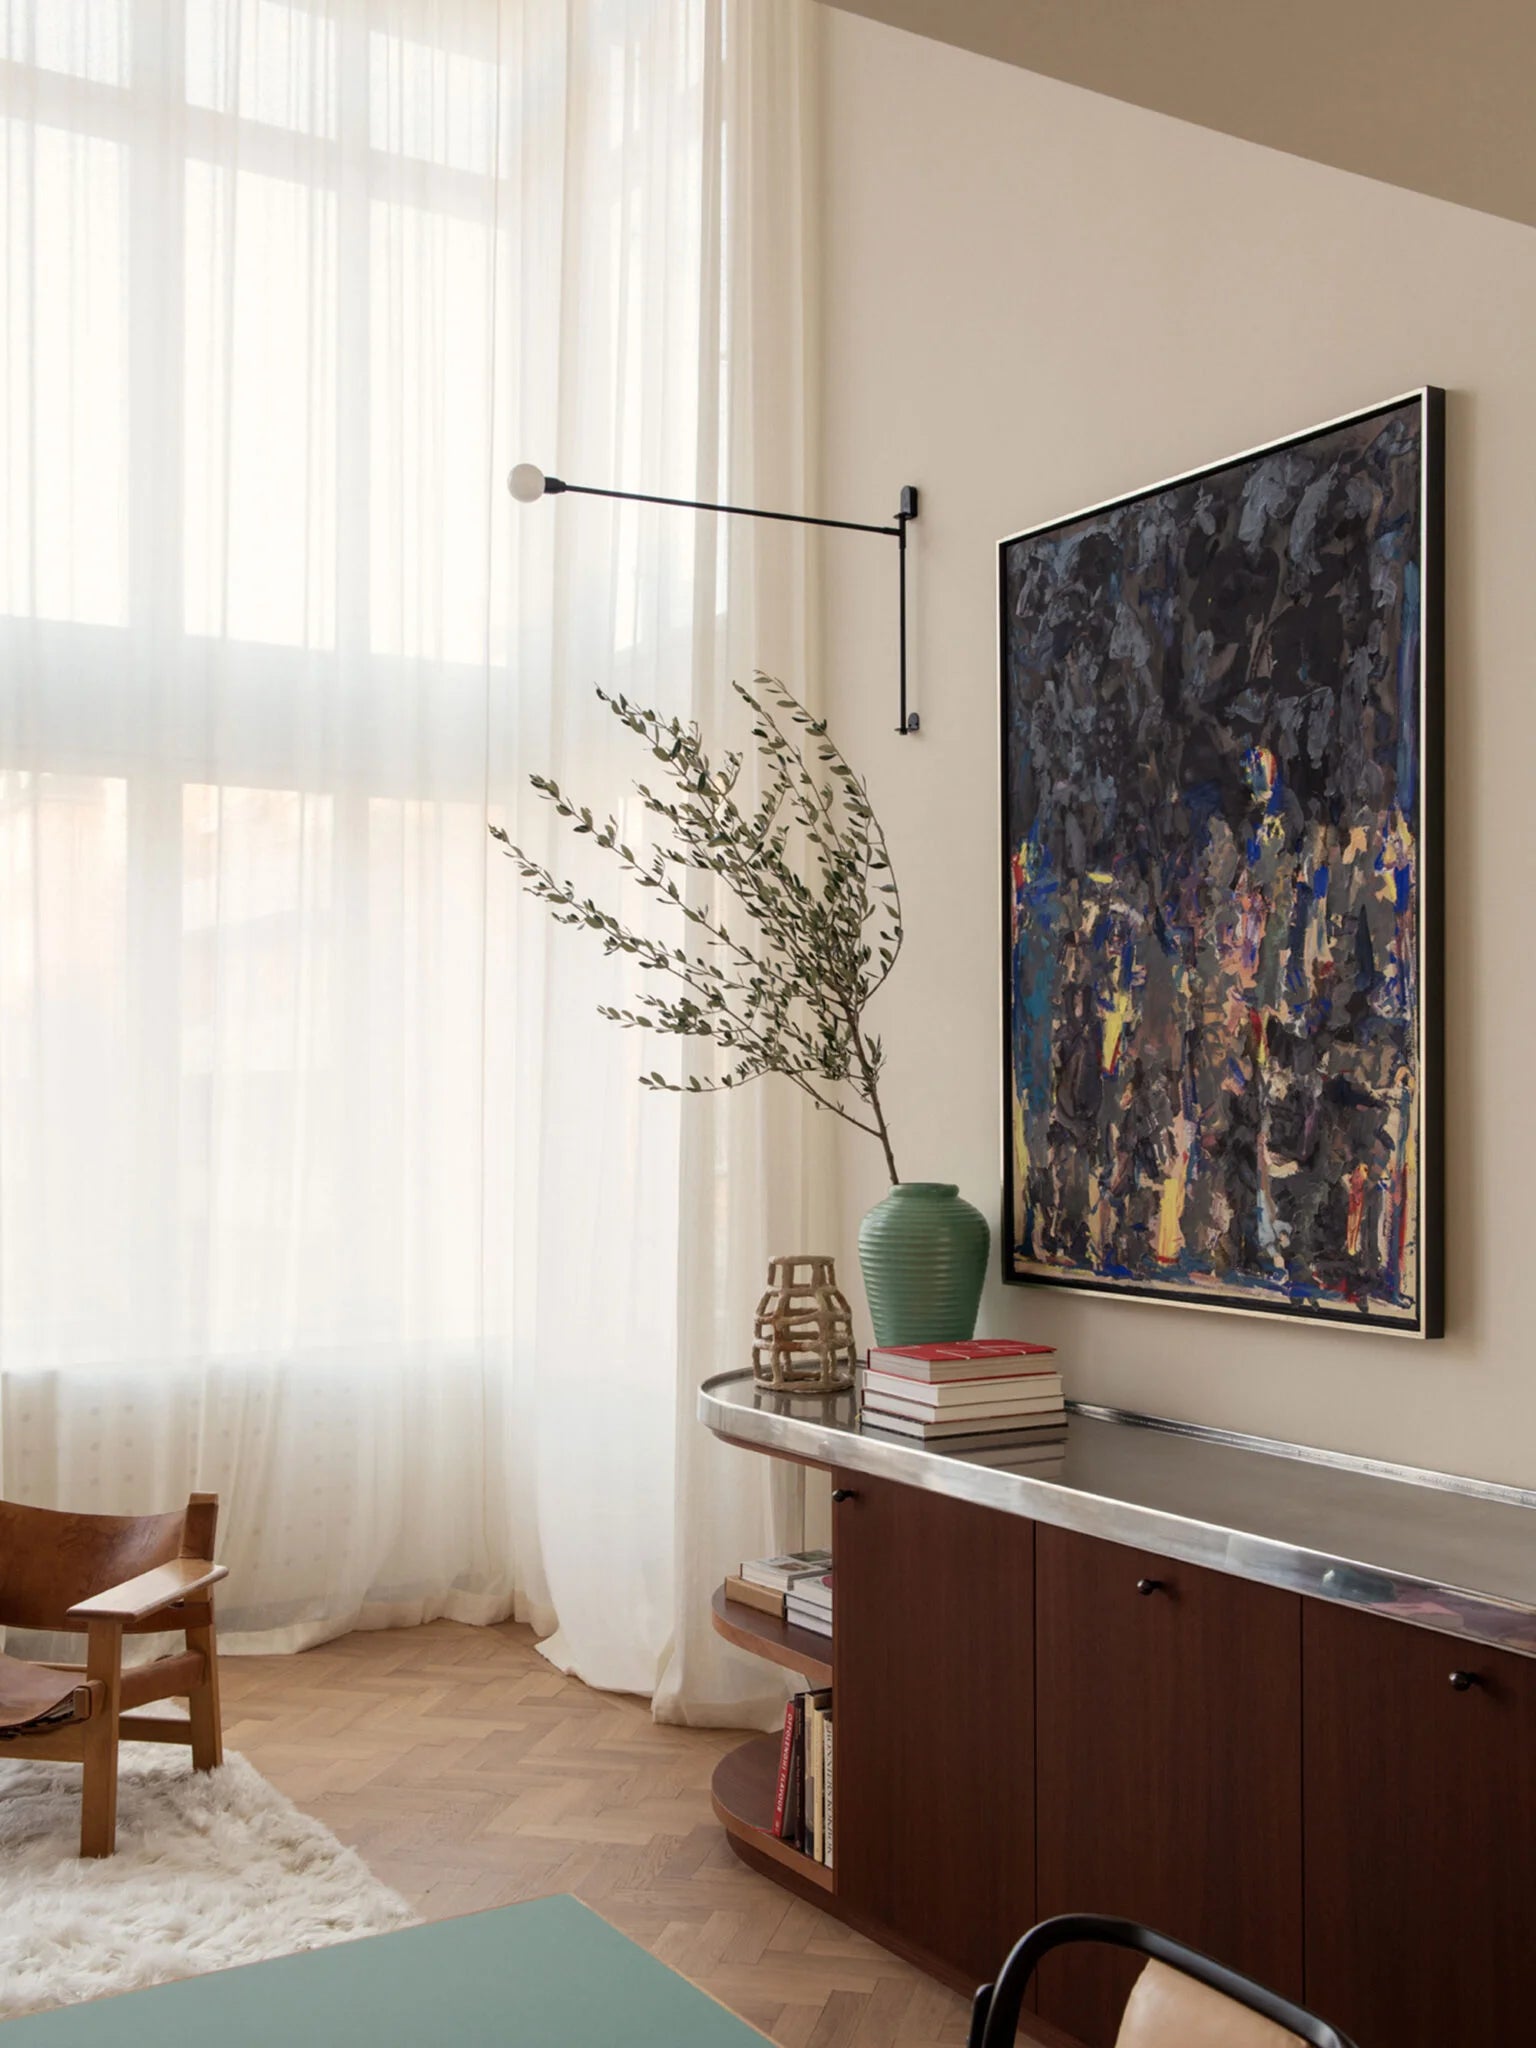  Apartment in Östermalm, Stockholm, painted in colours designed by Halleroed for Blēo Collective